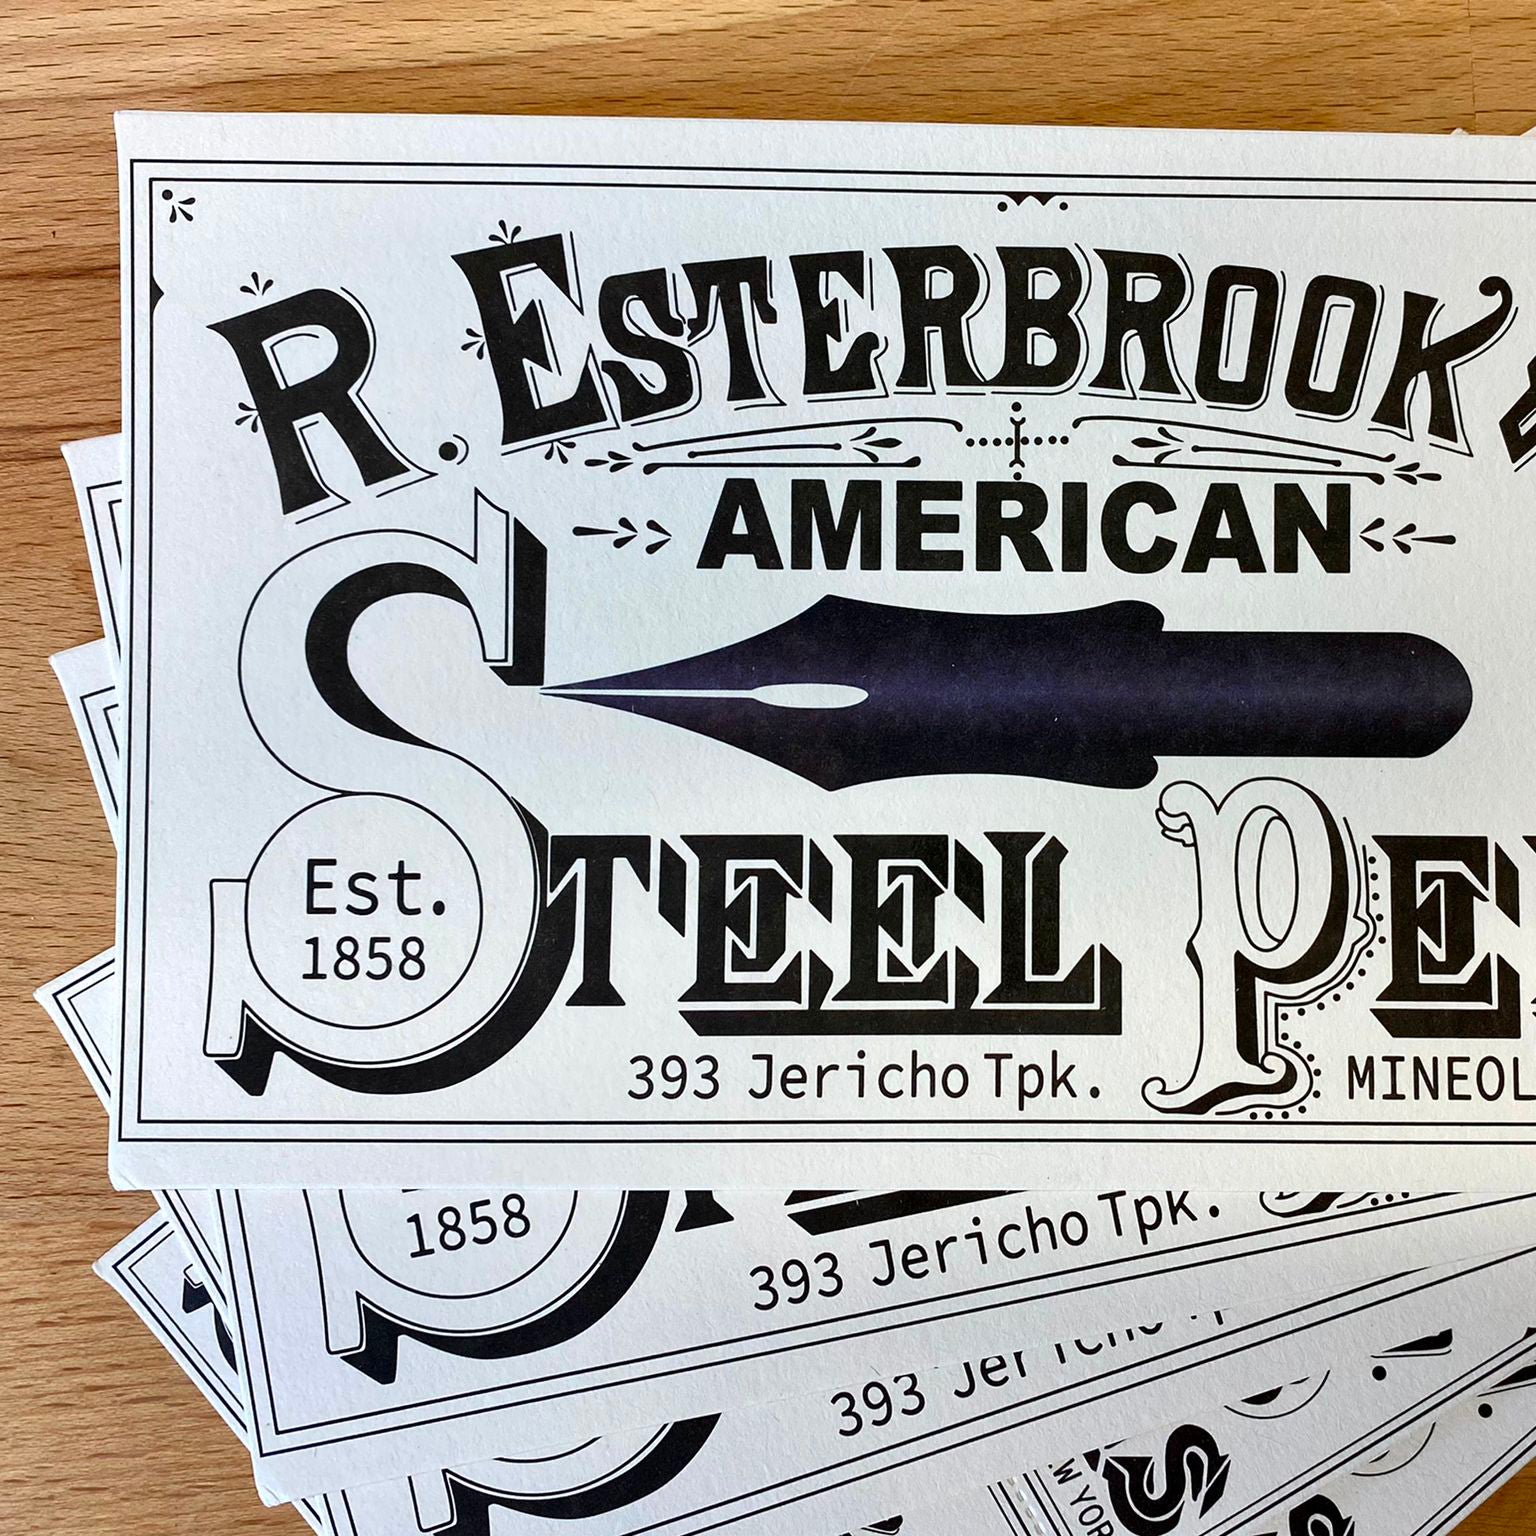 Esterbrook Blotter Paper - 5 pages. 3 large. 6 small